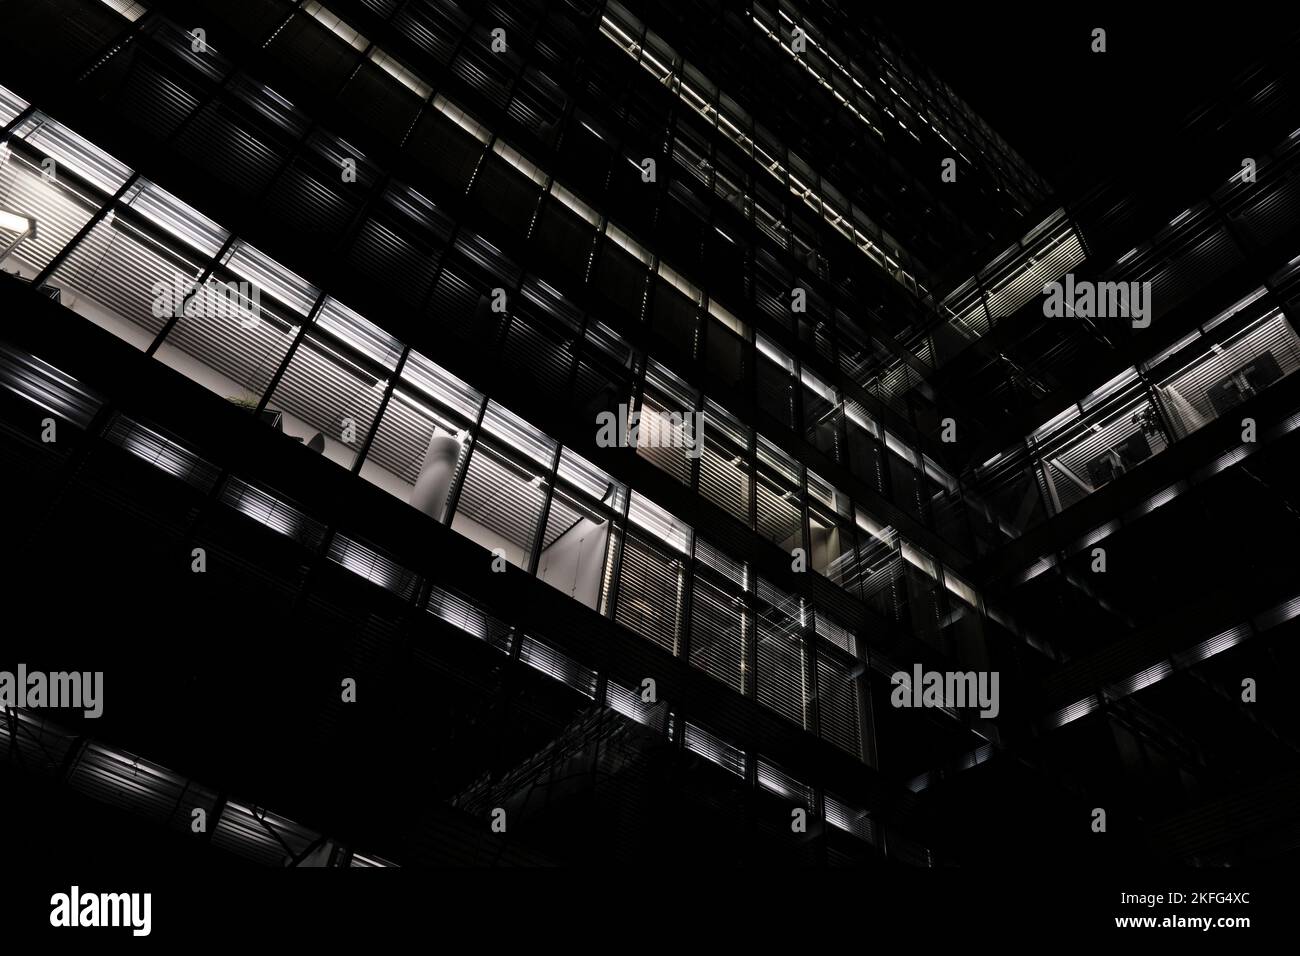 A dark night in Berlin - Berlin nighttime architecture. Modern architecture building, office building with lights in windows. Stock Photo